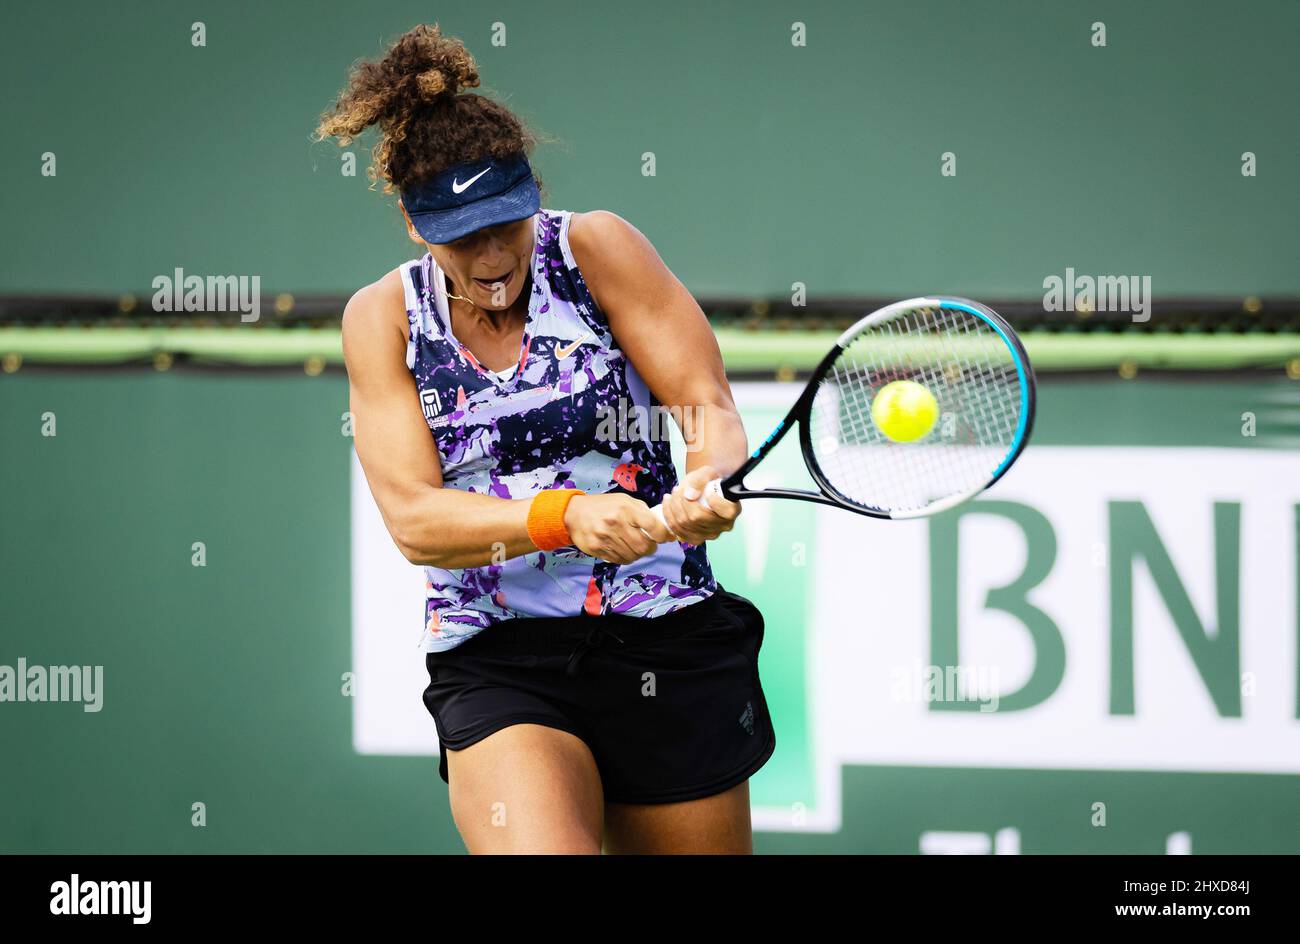 Mayar Sherif of Egypt in action against Magdalena Frech of Poland during the first round of the 2022 BNP Paribas Open, WTA 1000 tennis tournament on March 10, 2022 at Indian Wells